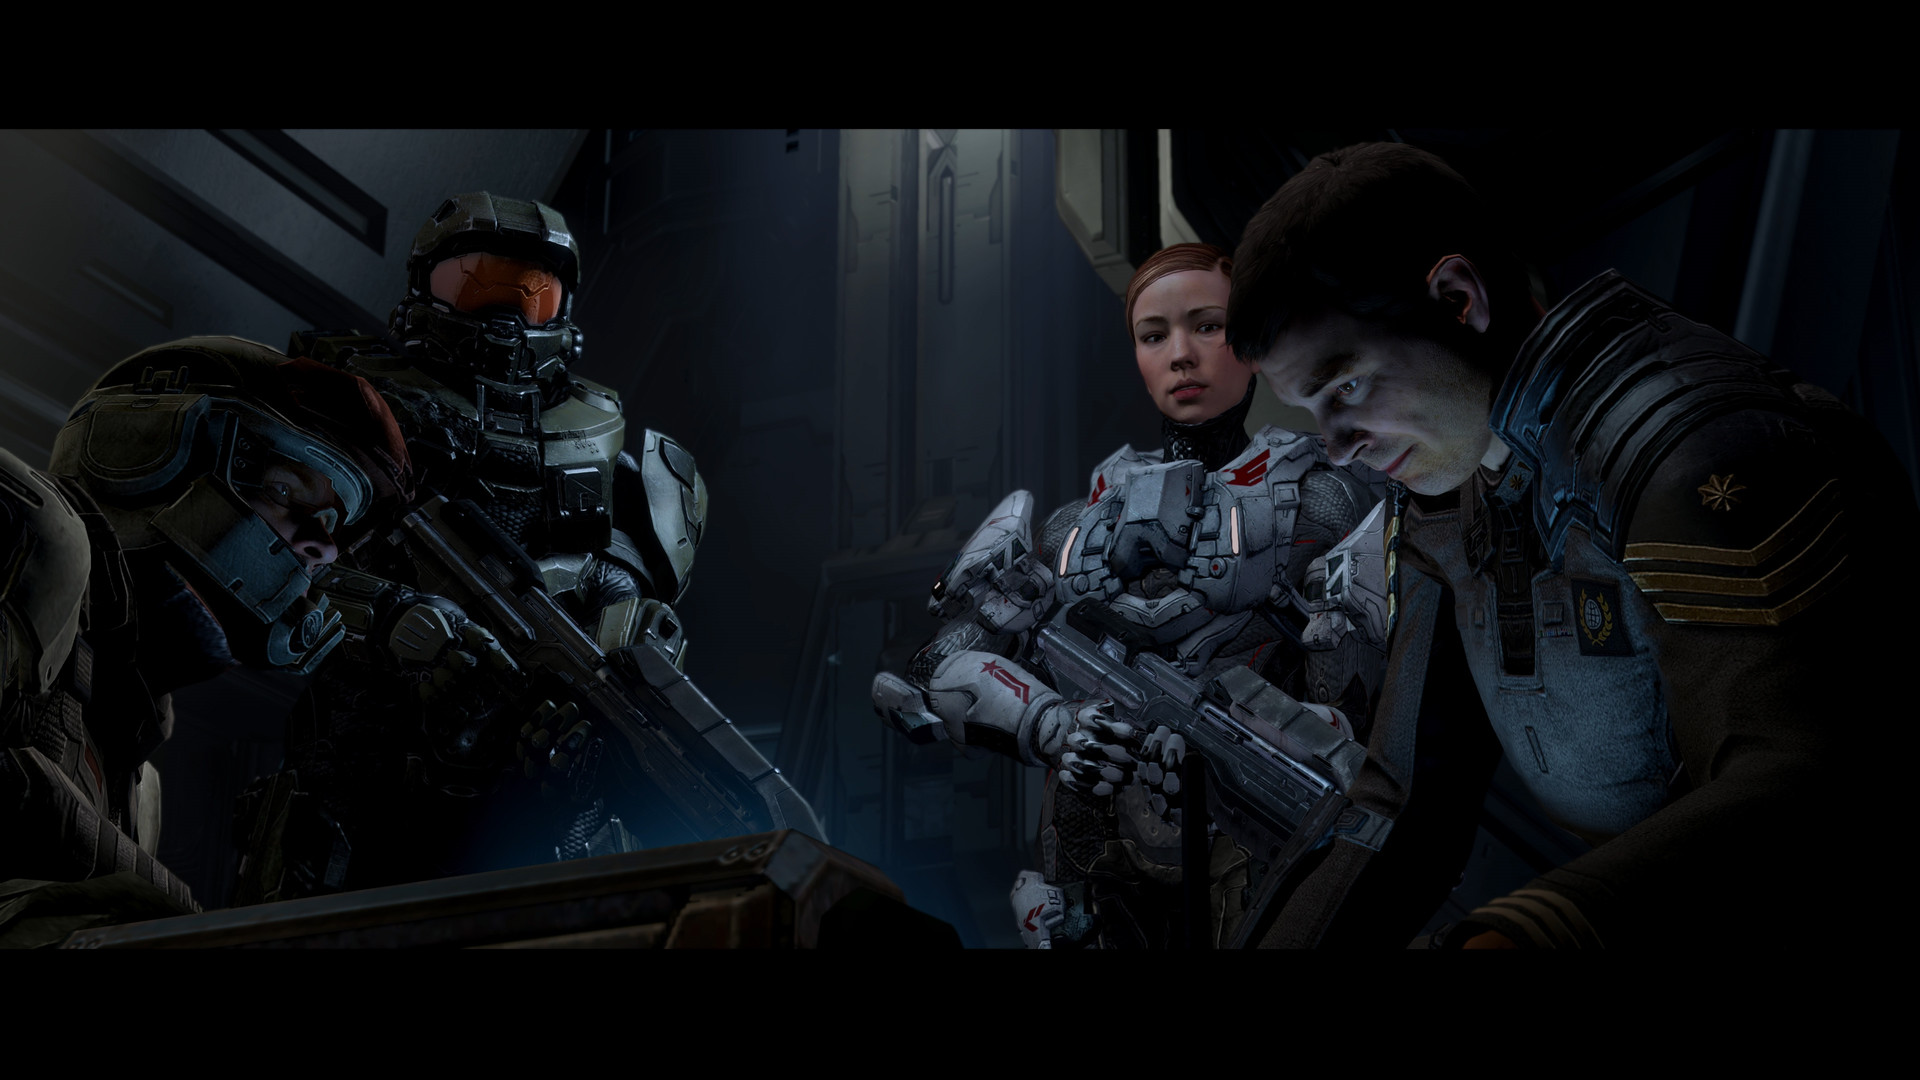 Master Chief looks on as soldiers prepare for a mission in Halo 4.